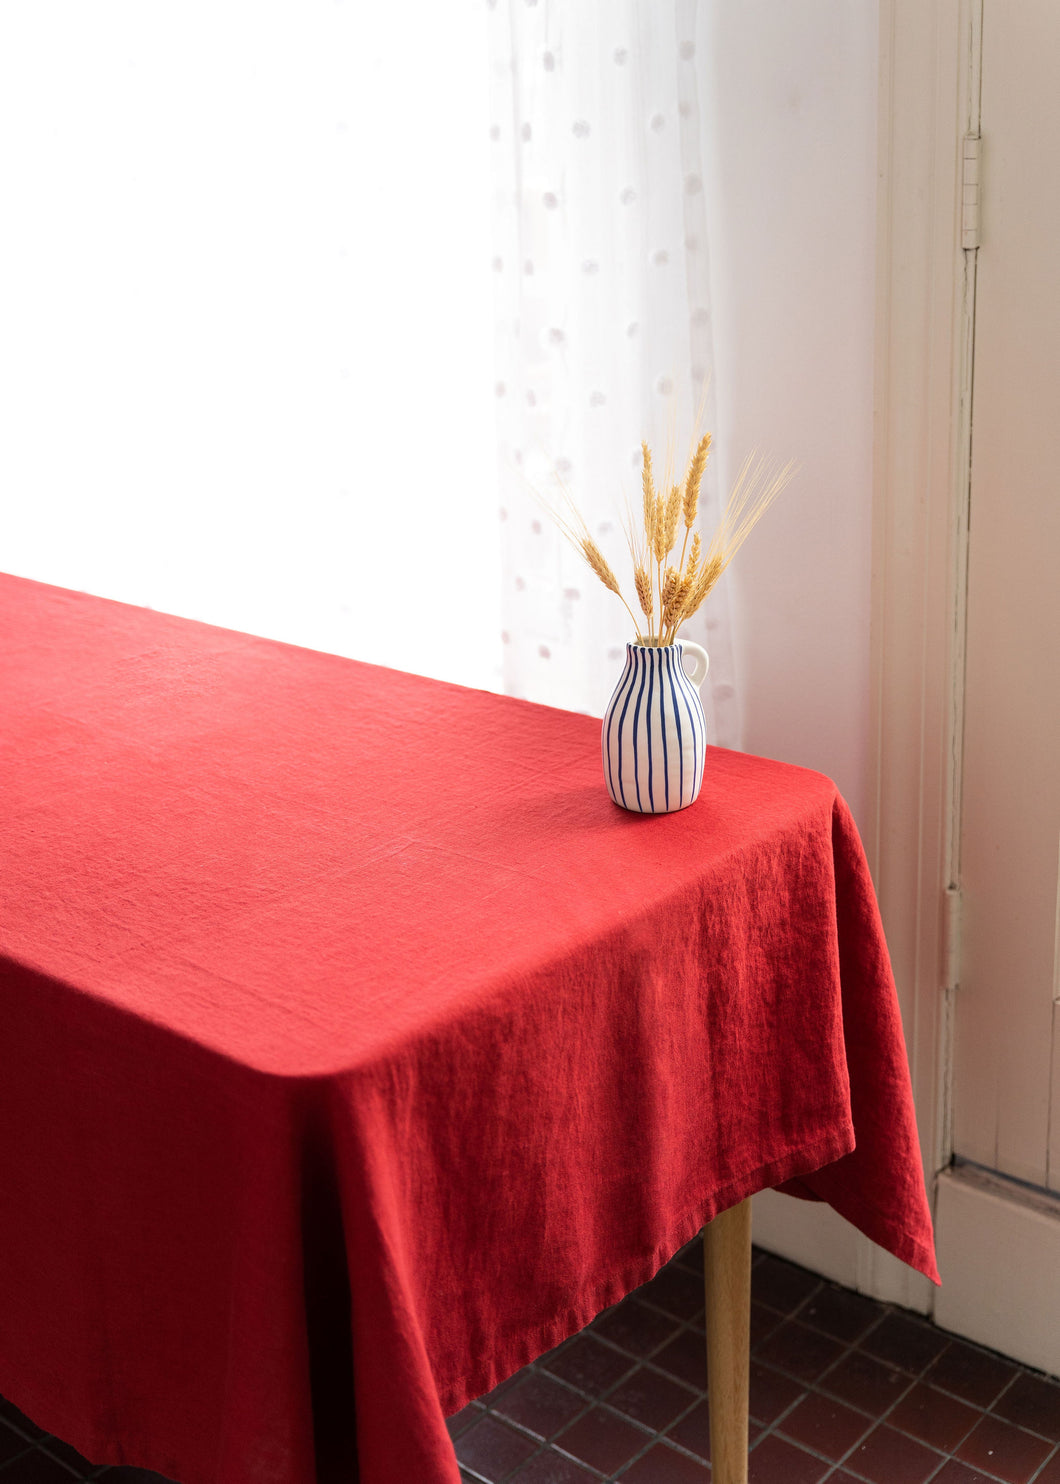 100% Linen Tablecloth in Vintage Red - 55